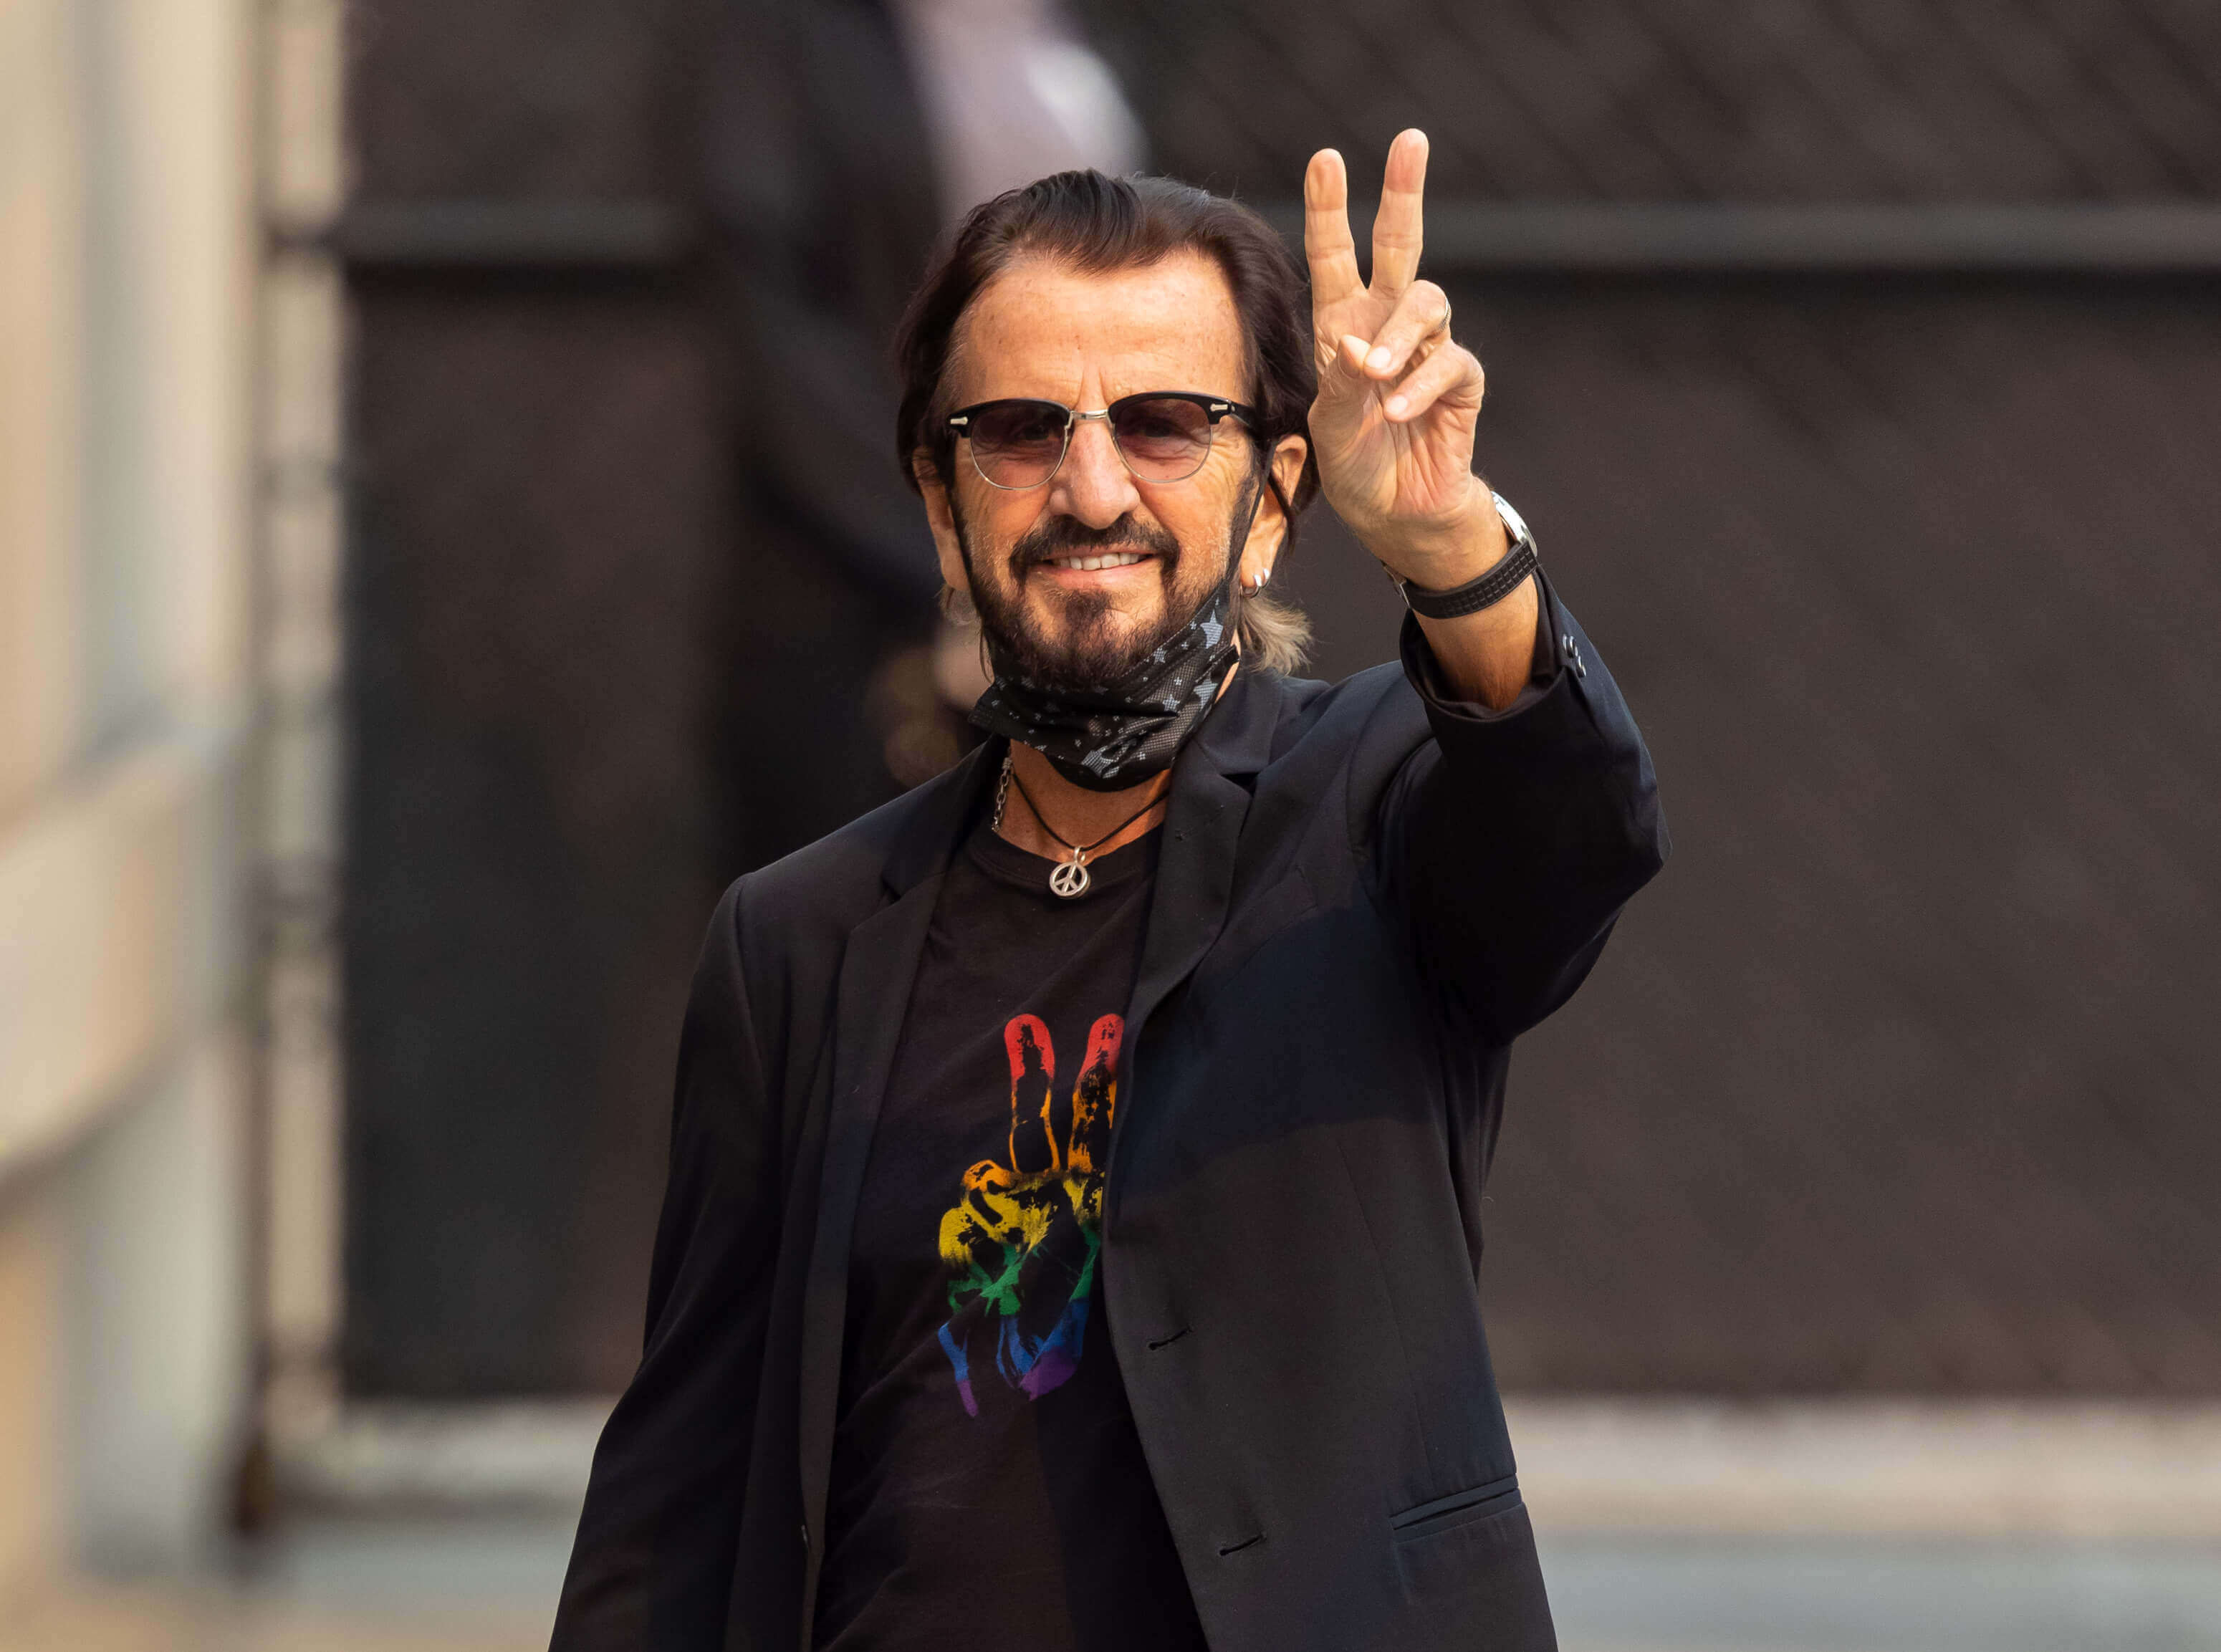 The Beatles' Ringo Starr wearing a shirt with an image of a hand on it